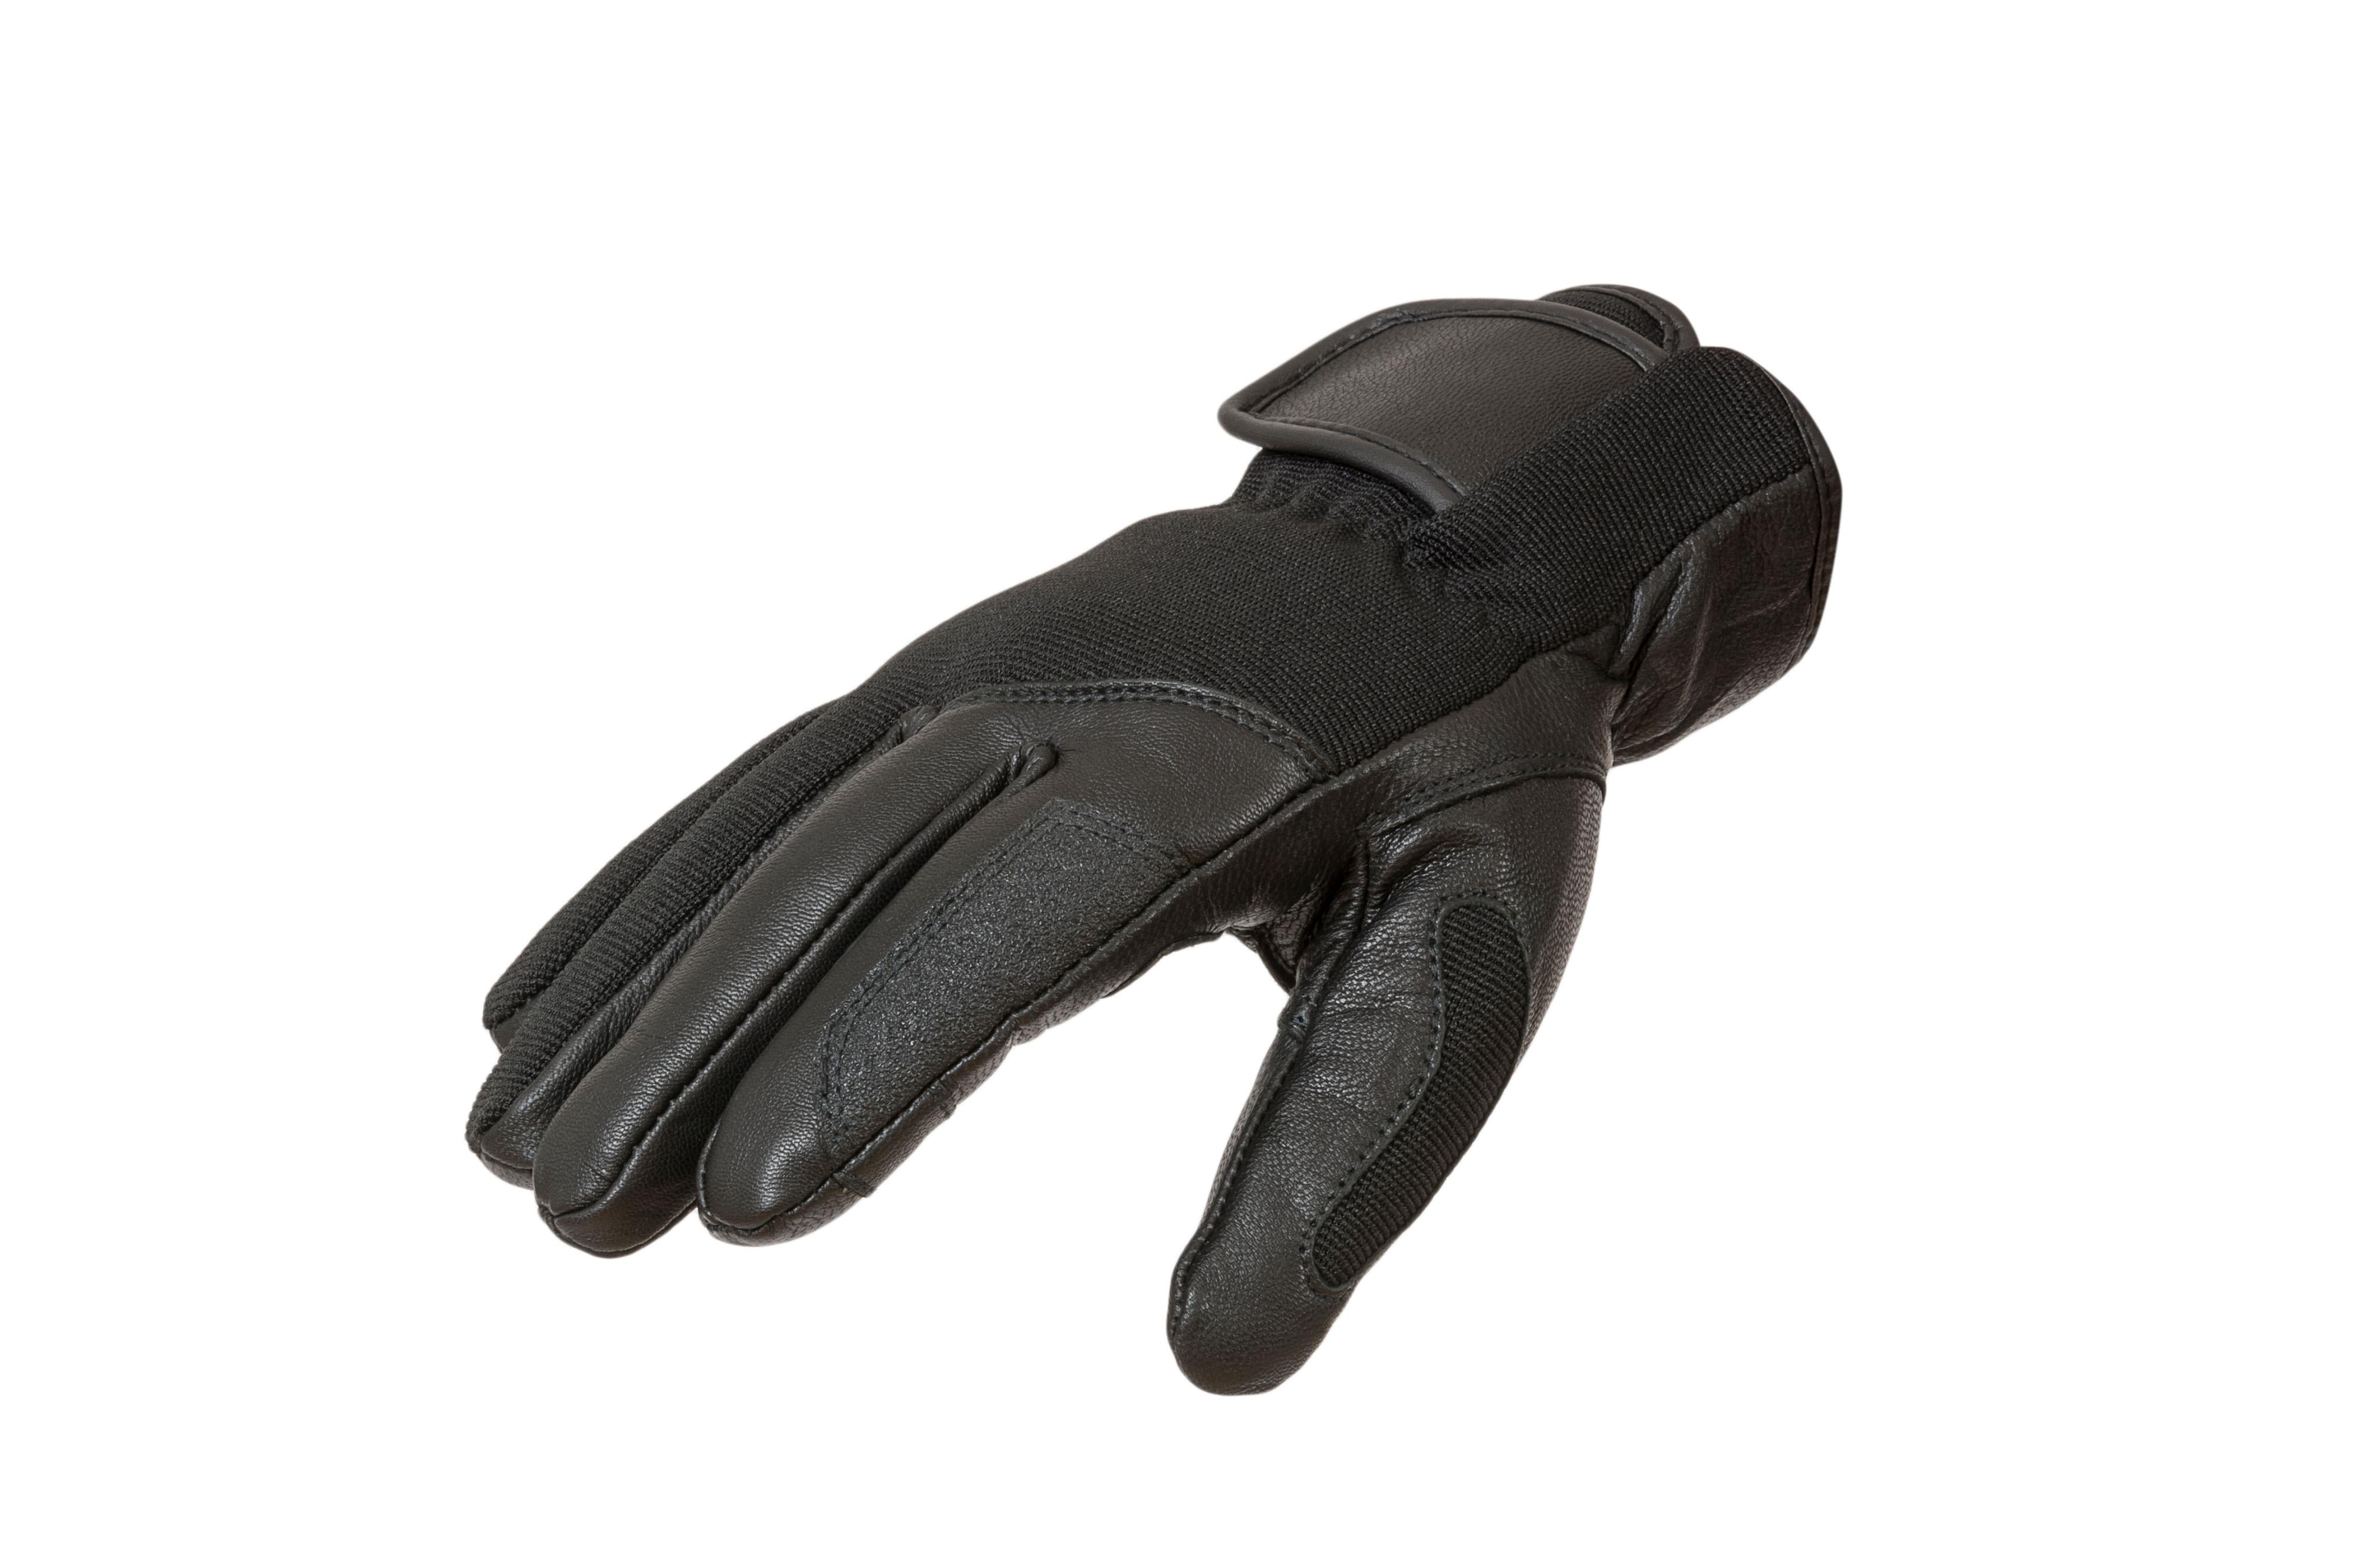 Special Ops Gloves